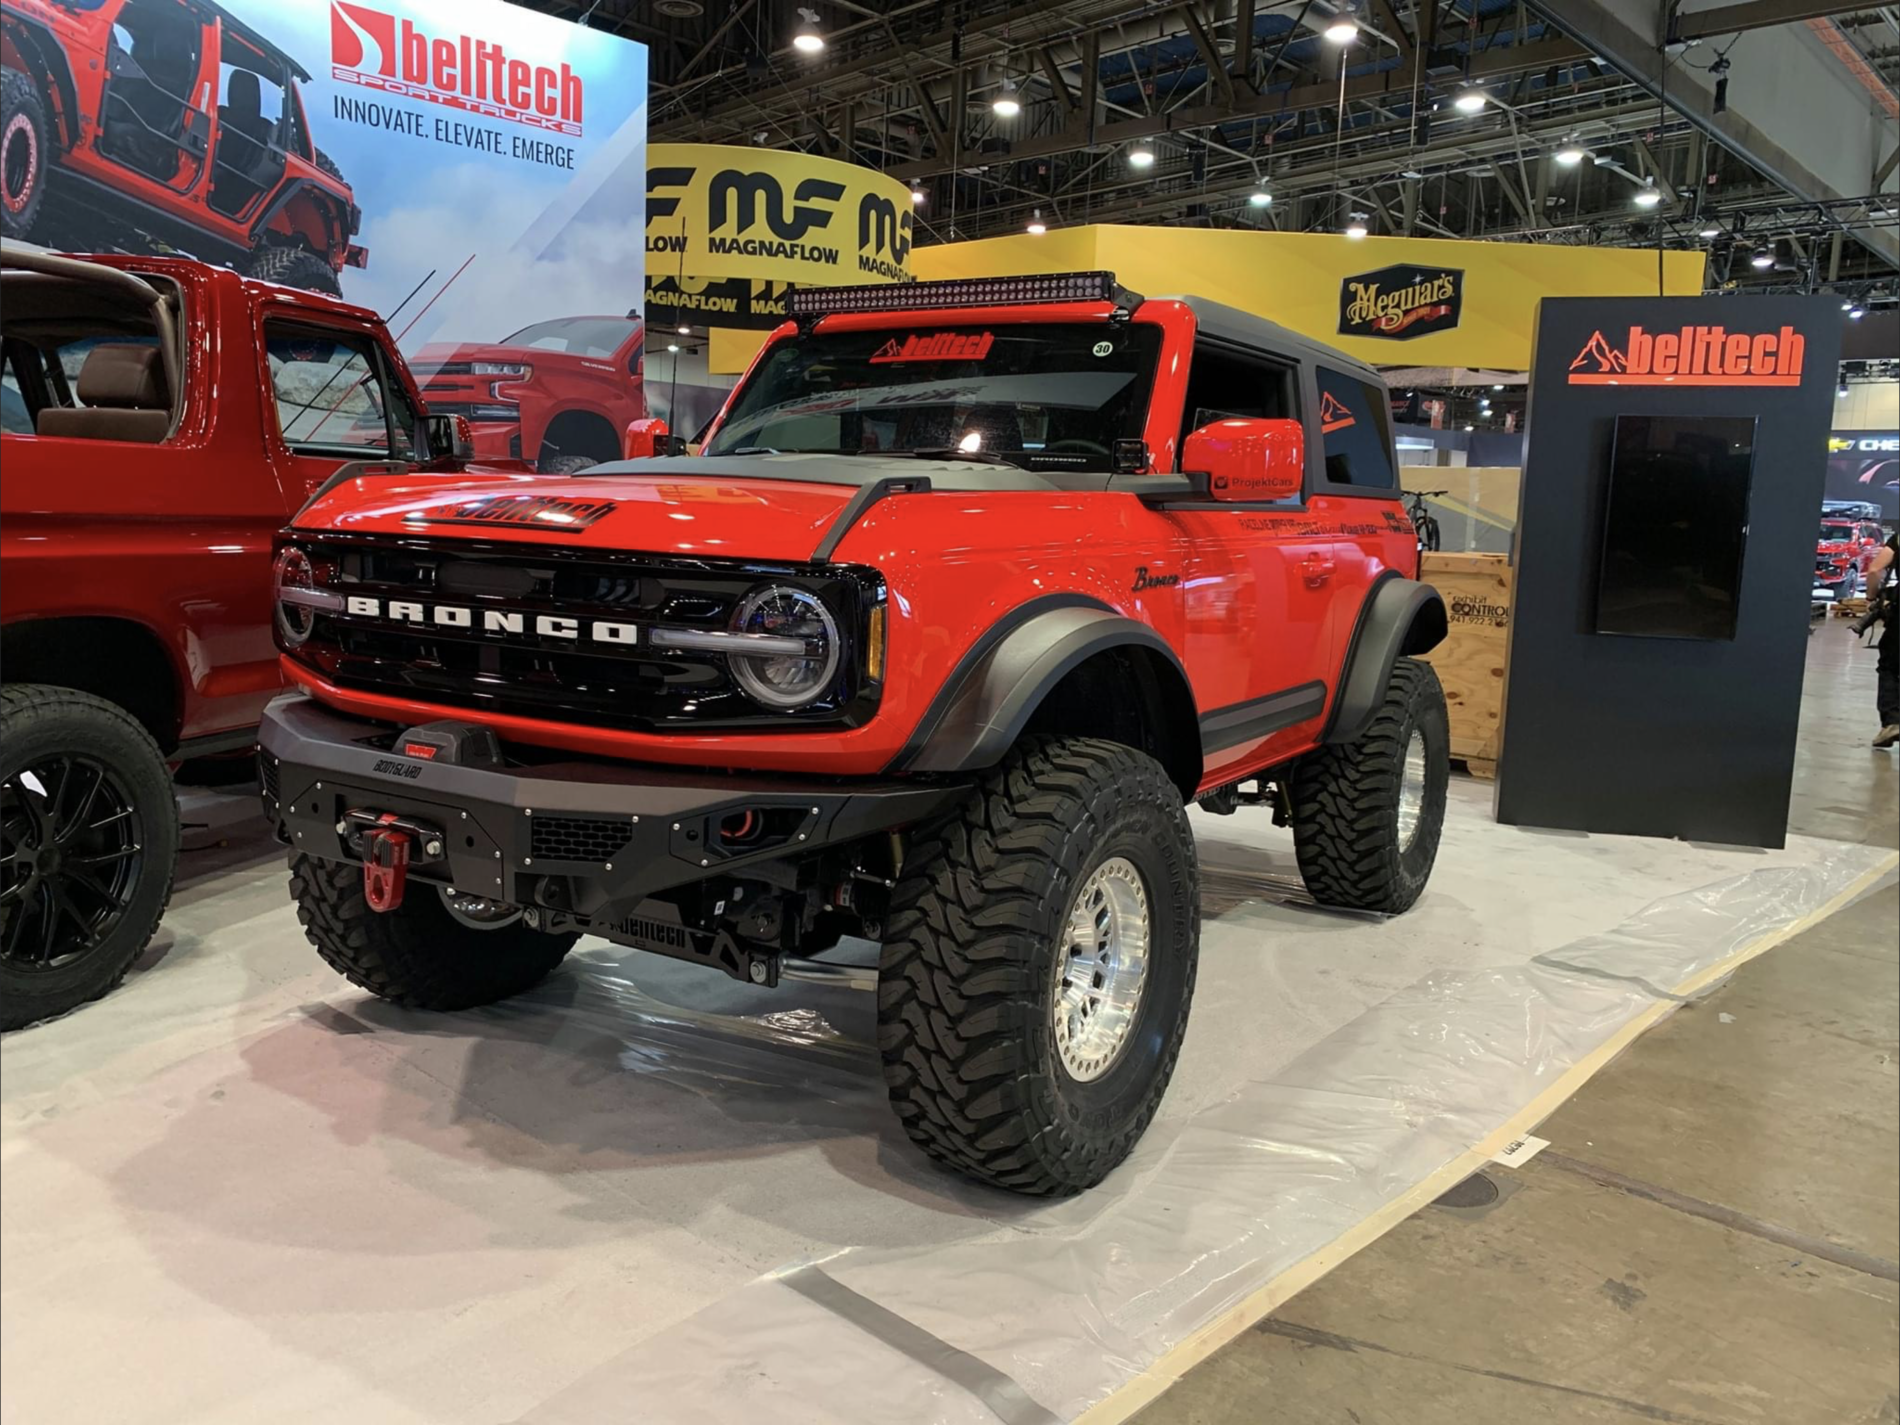 Ford Bronco Pics of (almost) all the SEMA Broncos In One Thread C7CC33A8-495D-4BF3-AEA1-C8E4583088A9